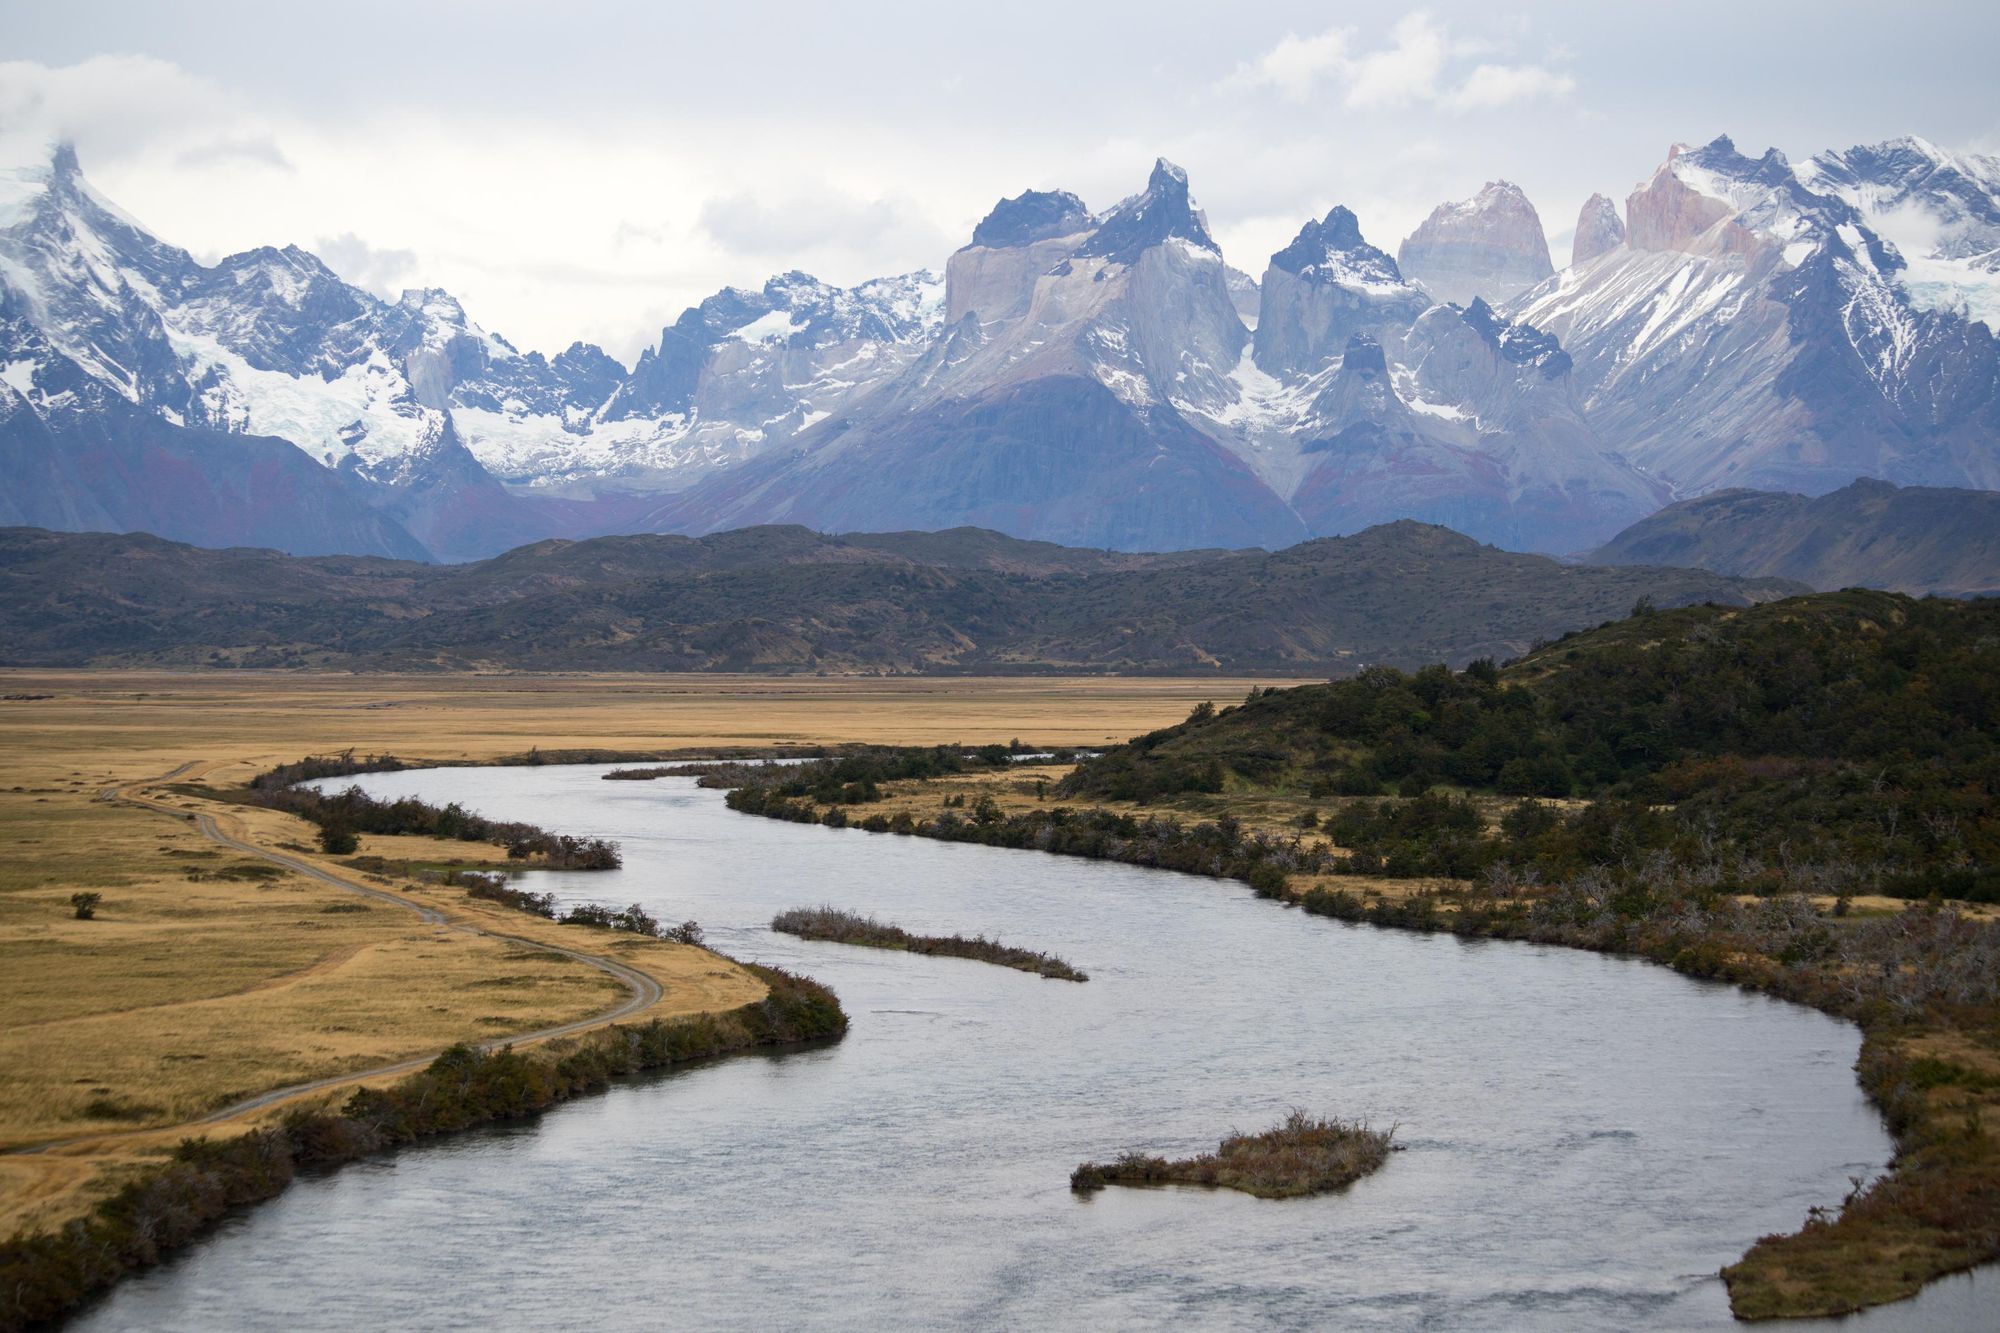 The Rio Serrano and the plains below the mountains of the Torres del Paine. Photo: Getty